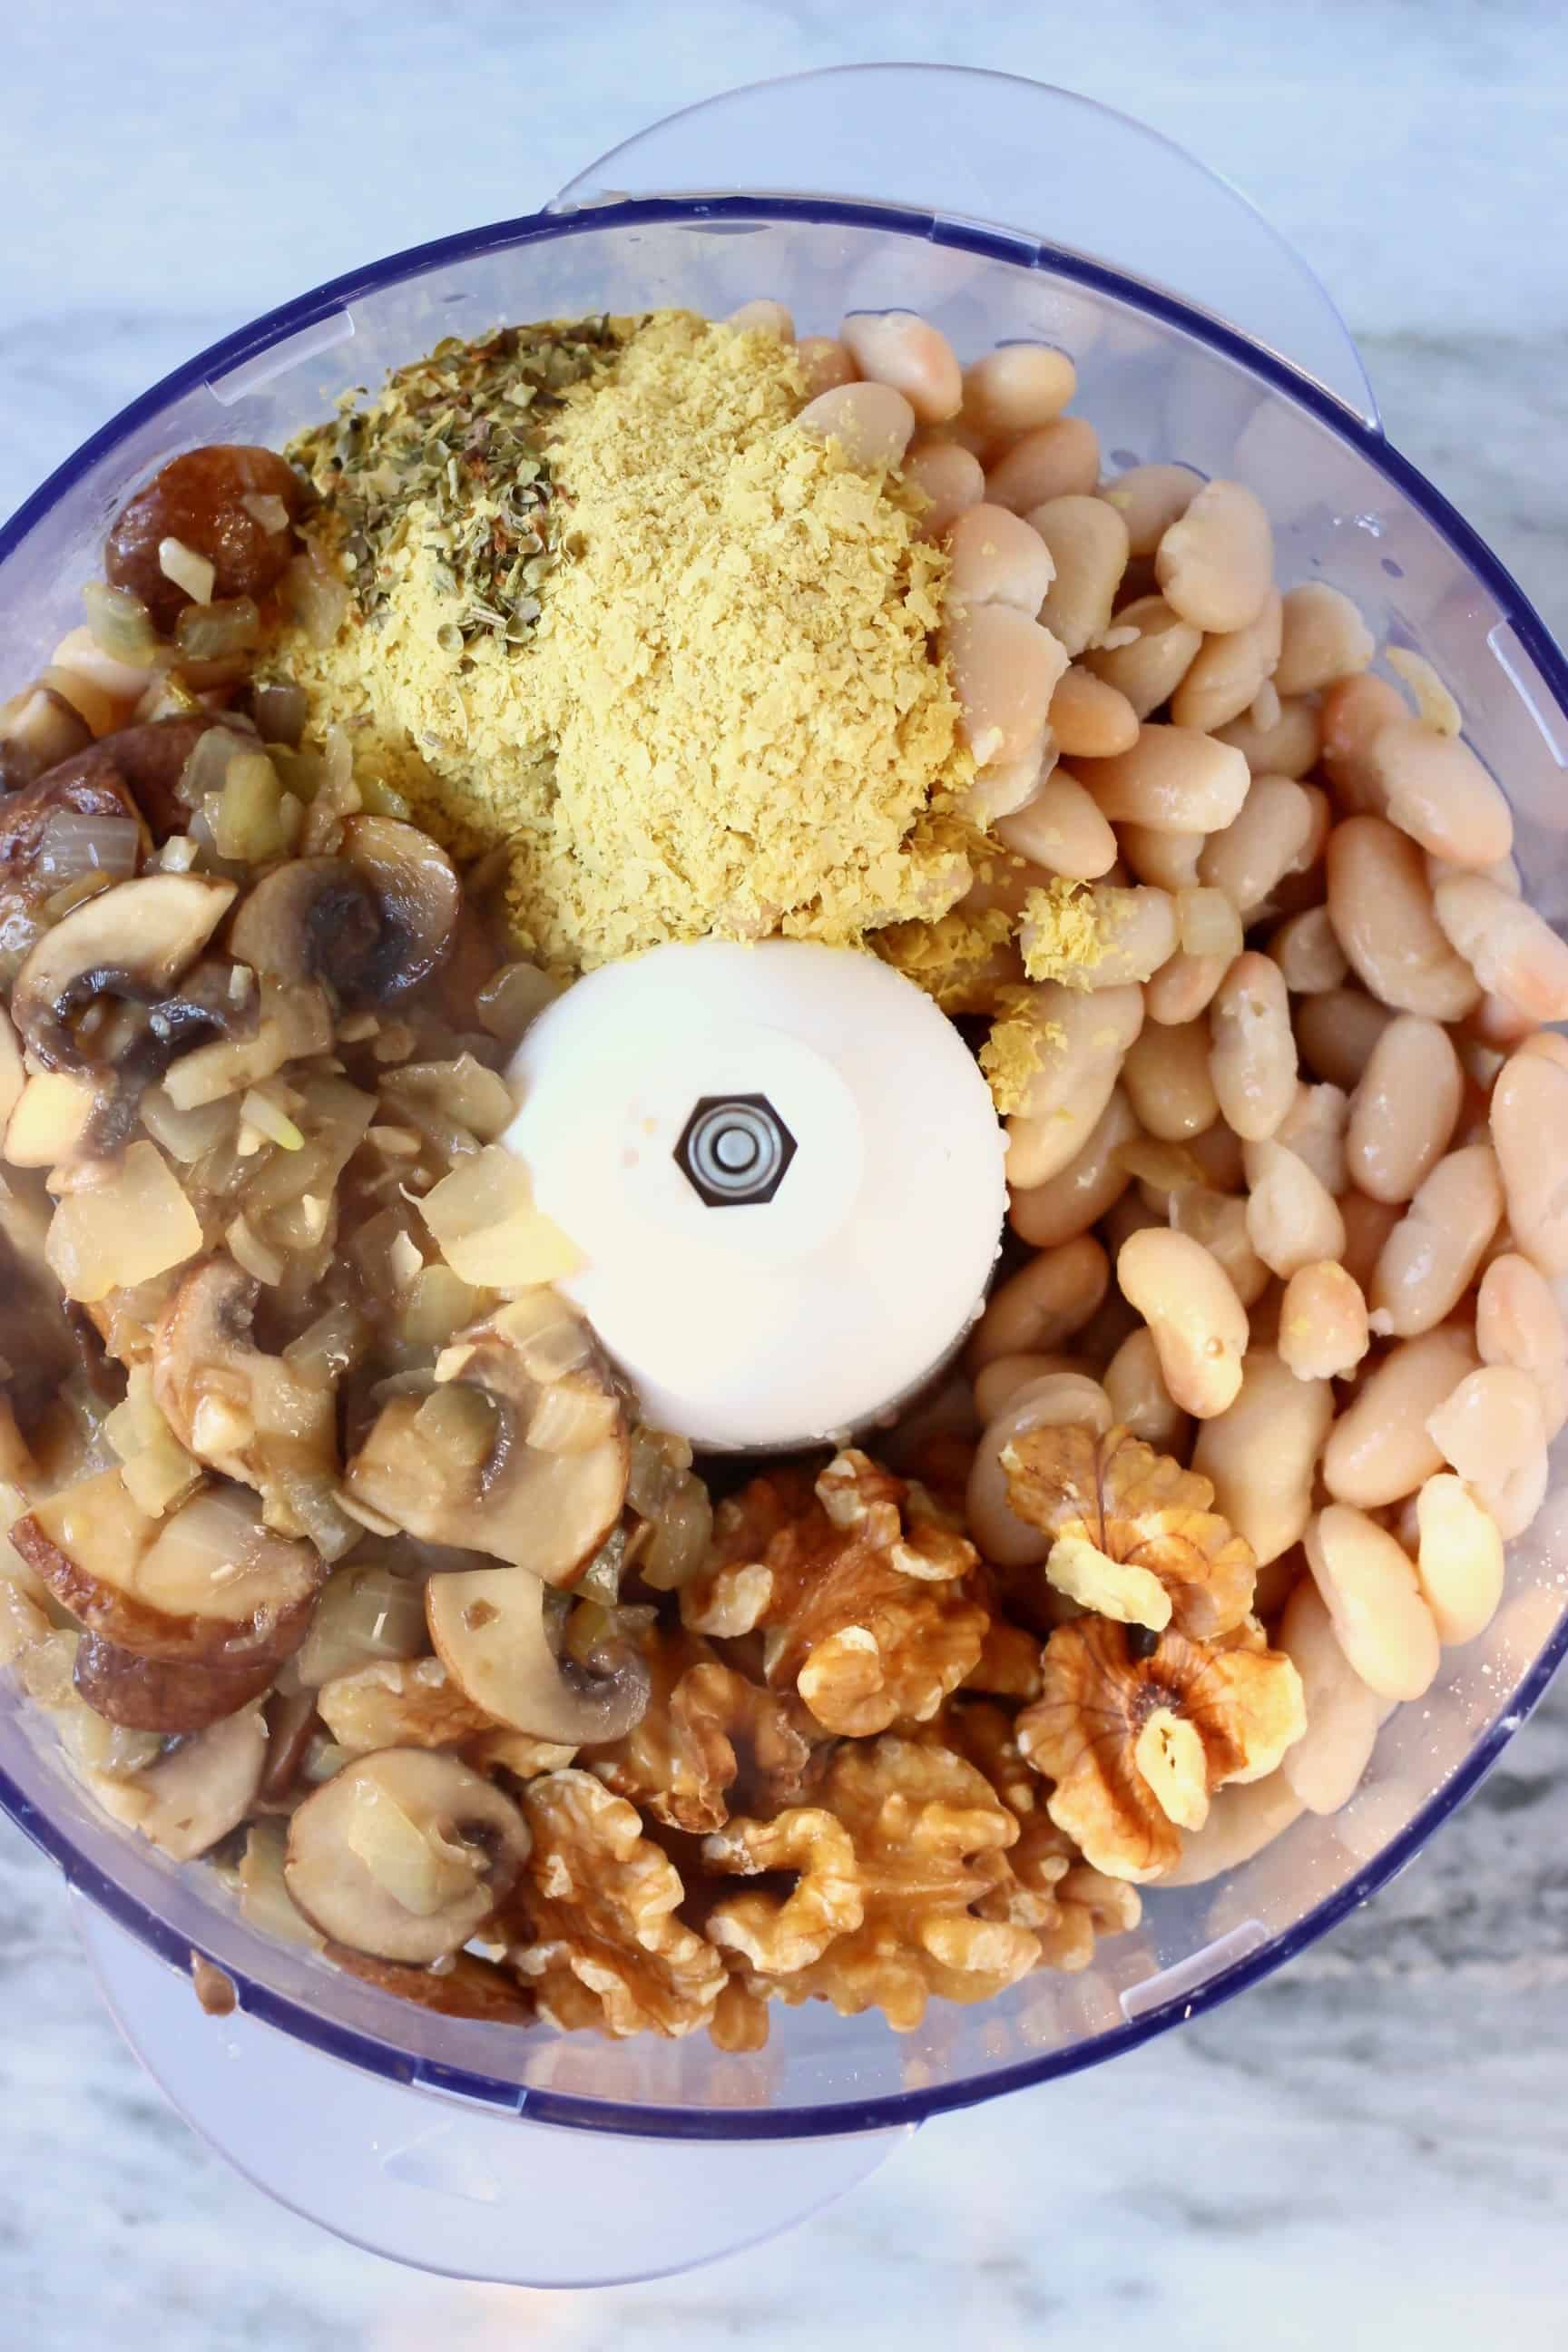 Fried onions, mushrooms, white beans, herbs and spices in a food processor